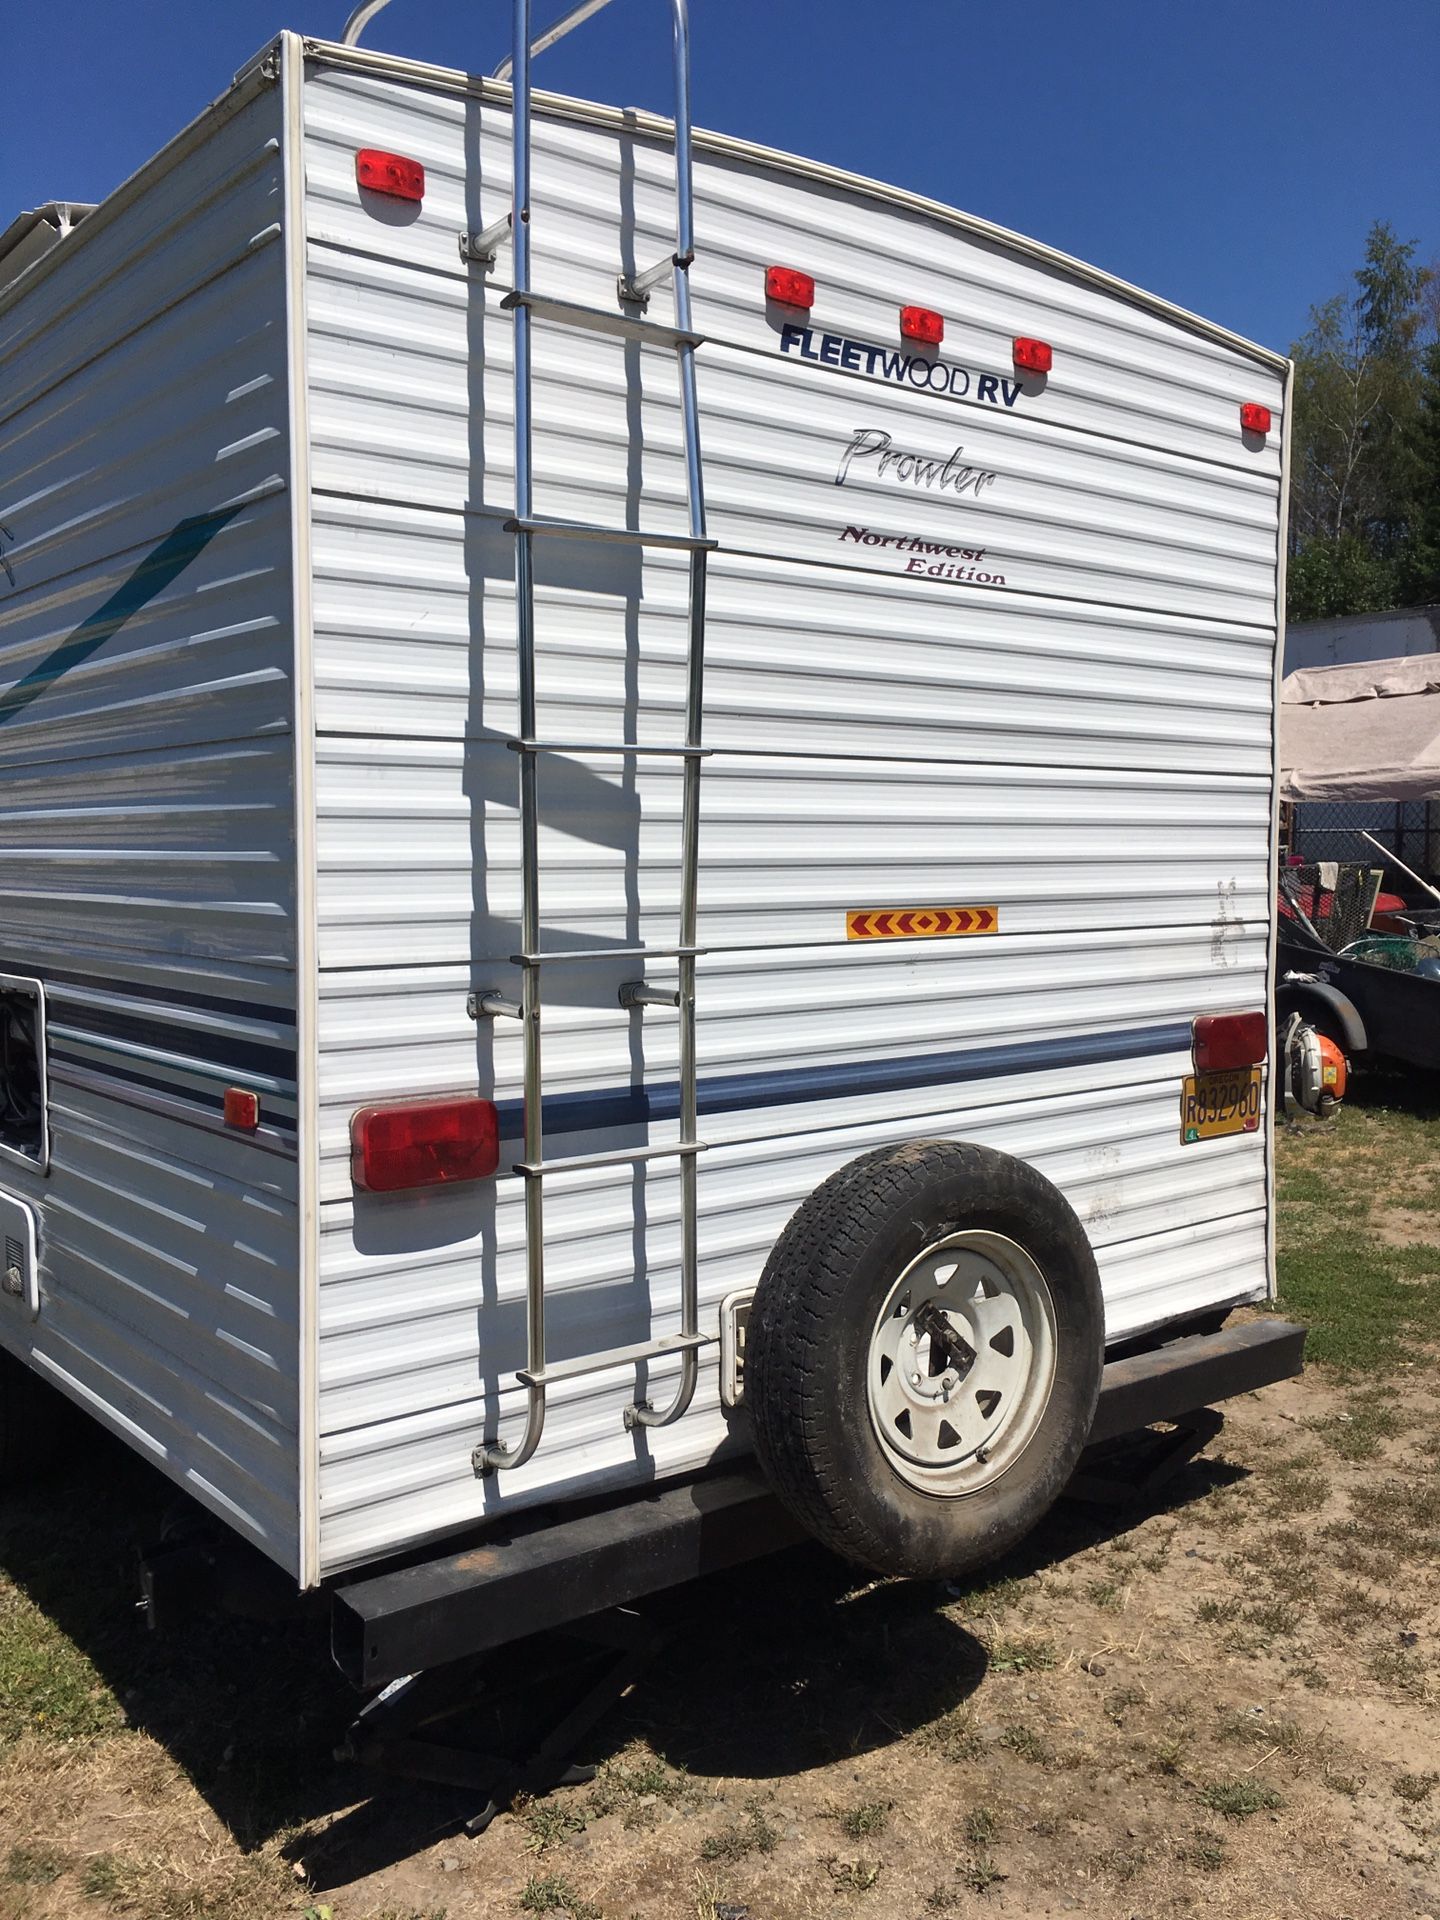 Only $4500 2001 ferry wood rv prowler, new carpet, new floor , new paints, new bunks bed moving must sale today